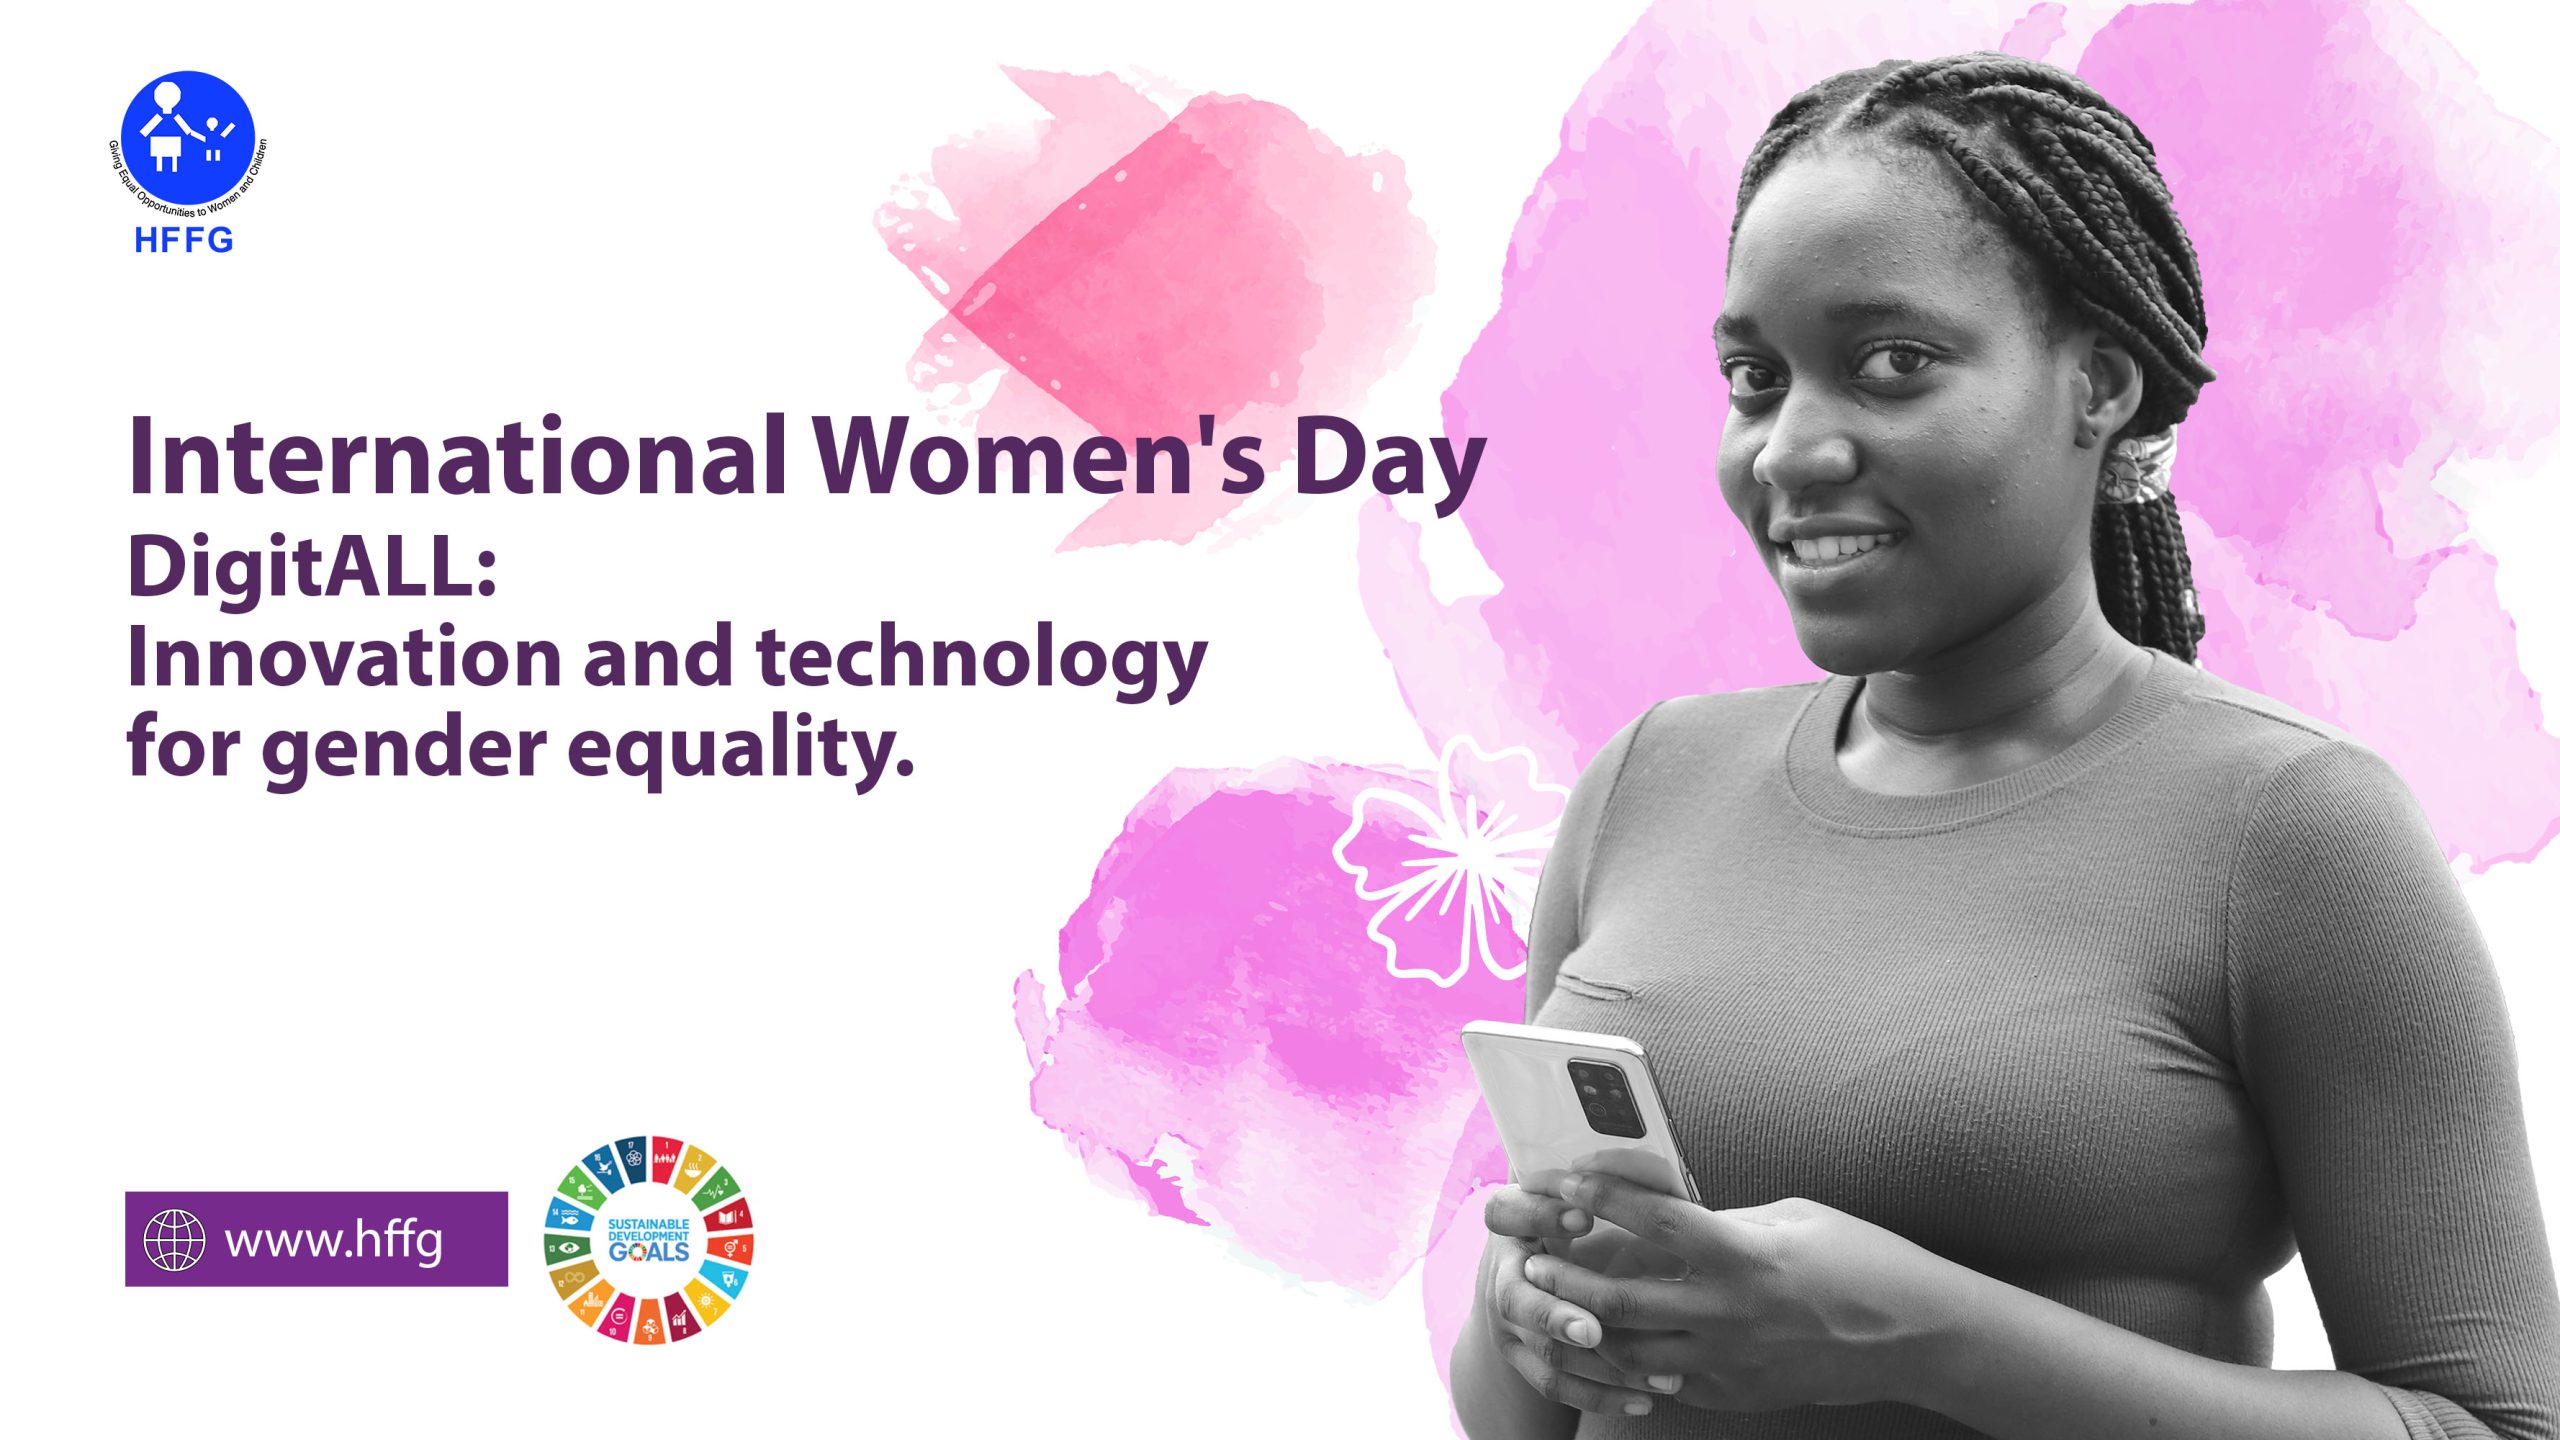 HFFG calls for empowerment of women in the digital space